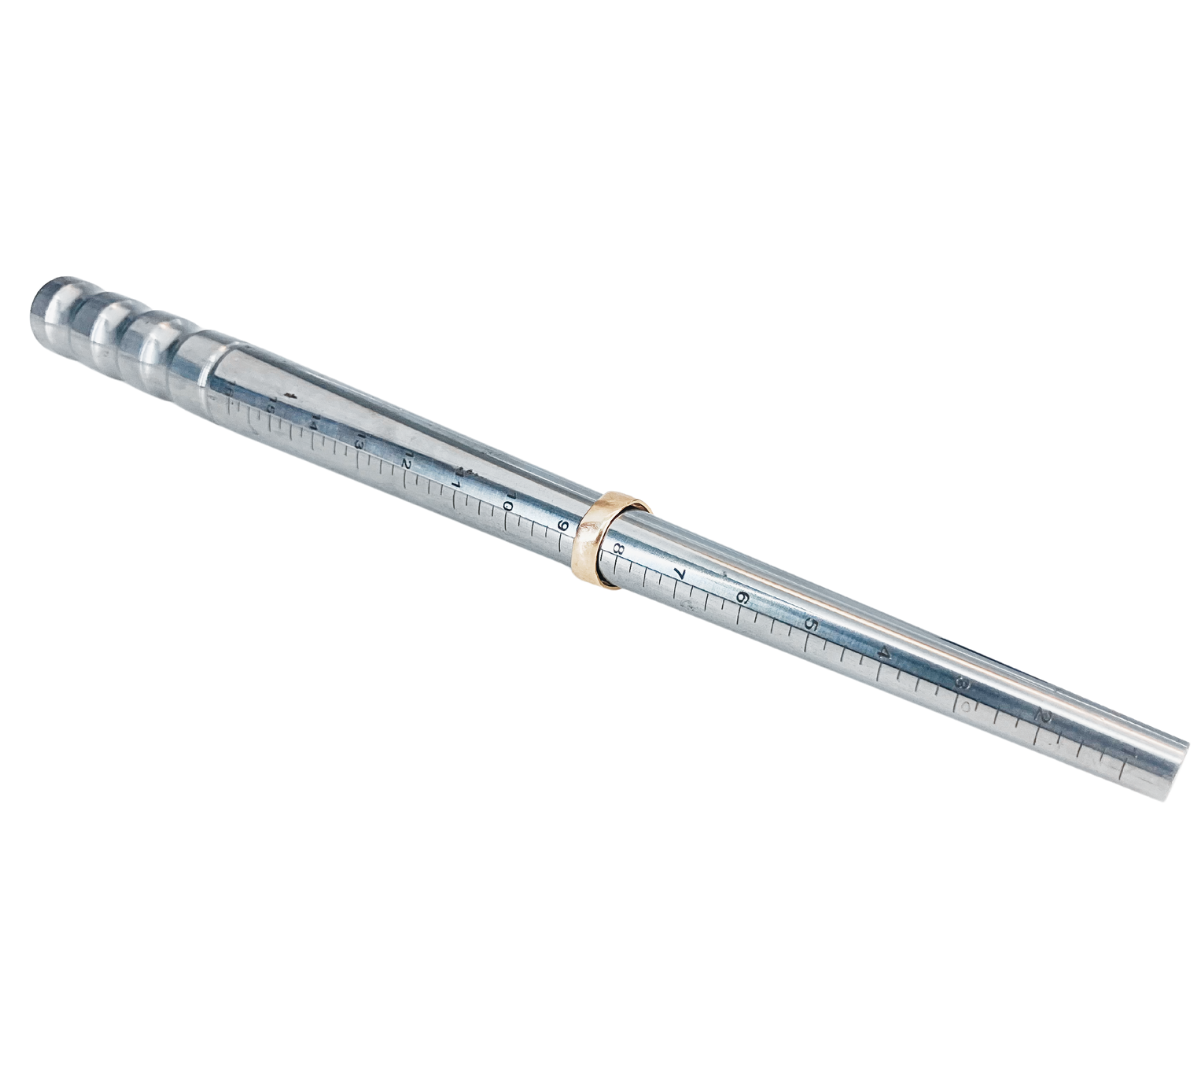 13 Inch Steel Ring Mandrel With Finger Grip Handle  - TJ9710AA-D16